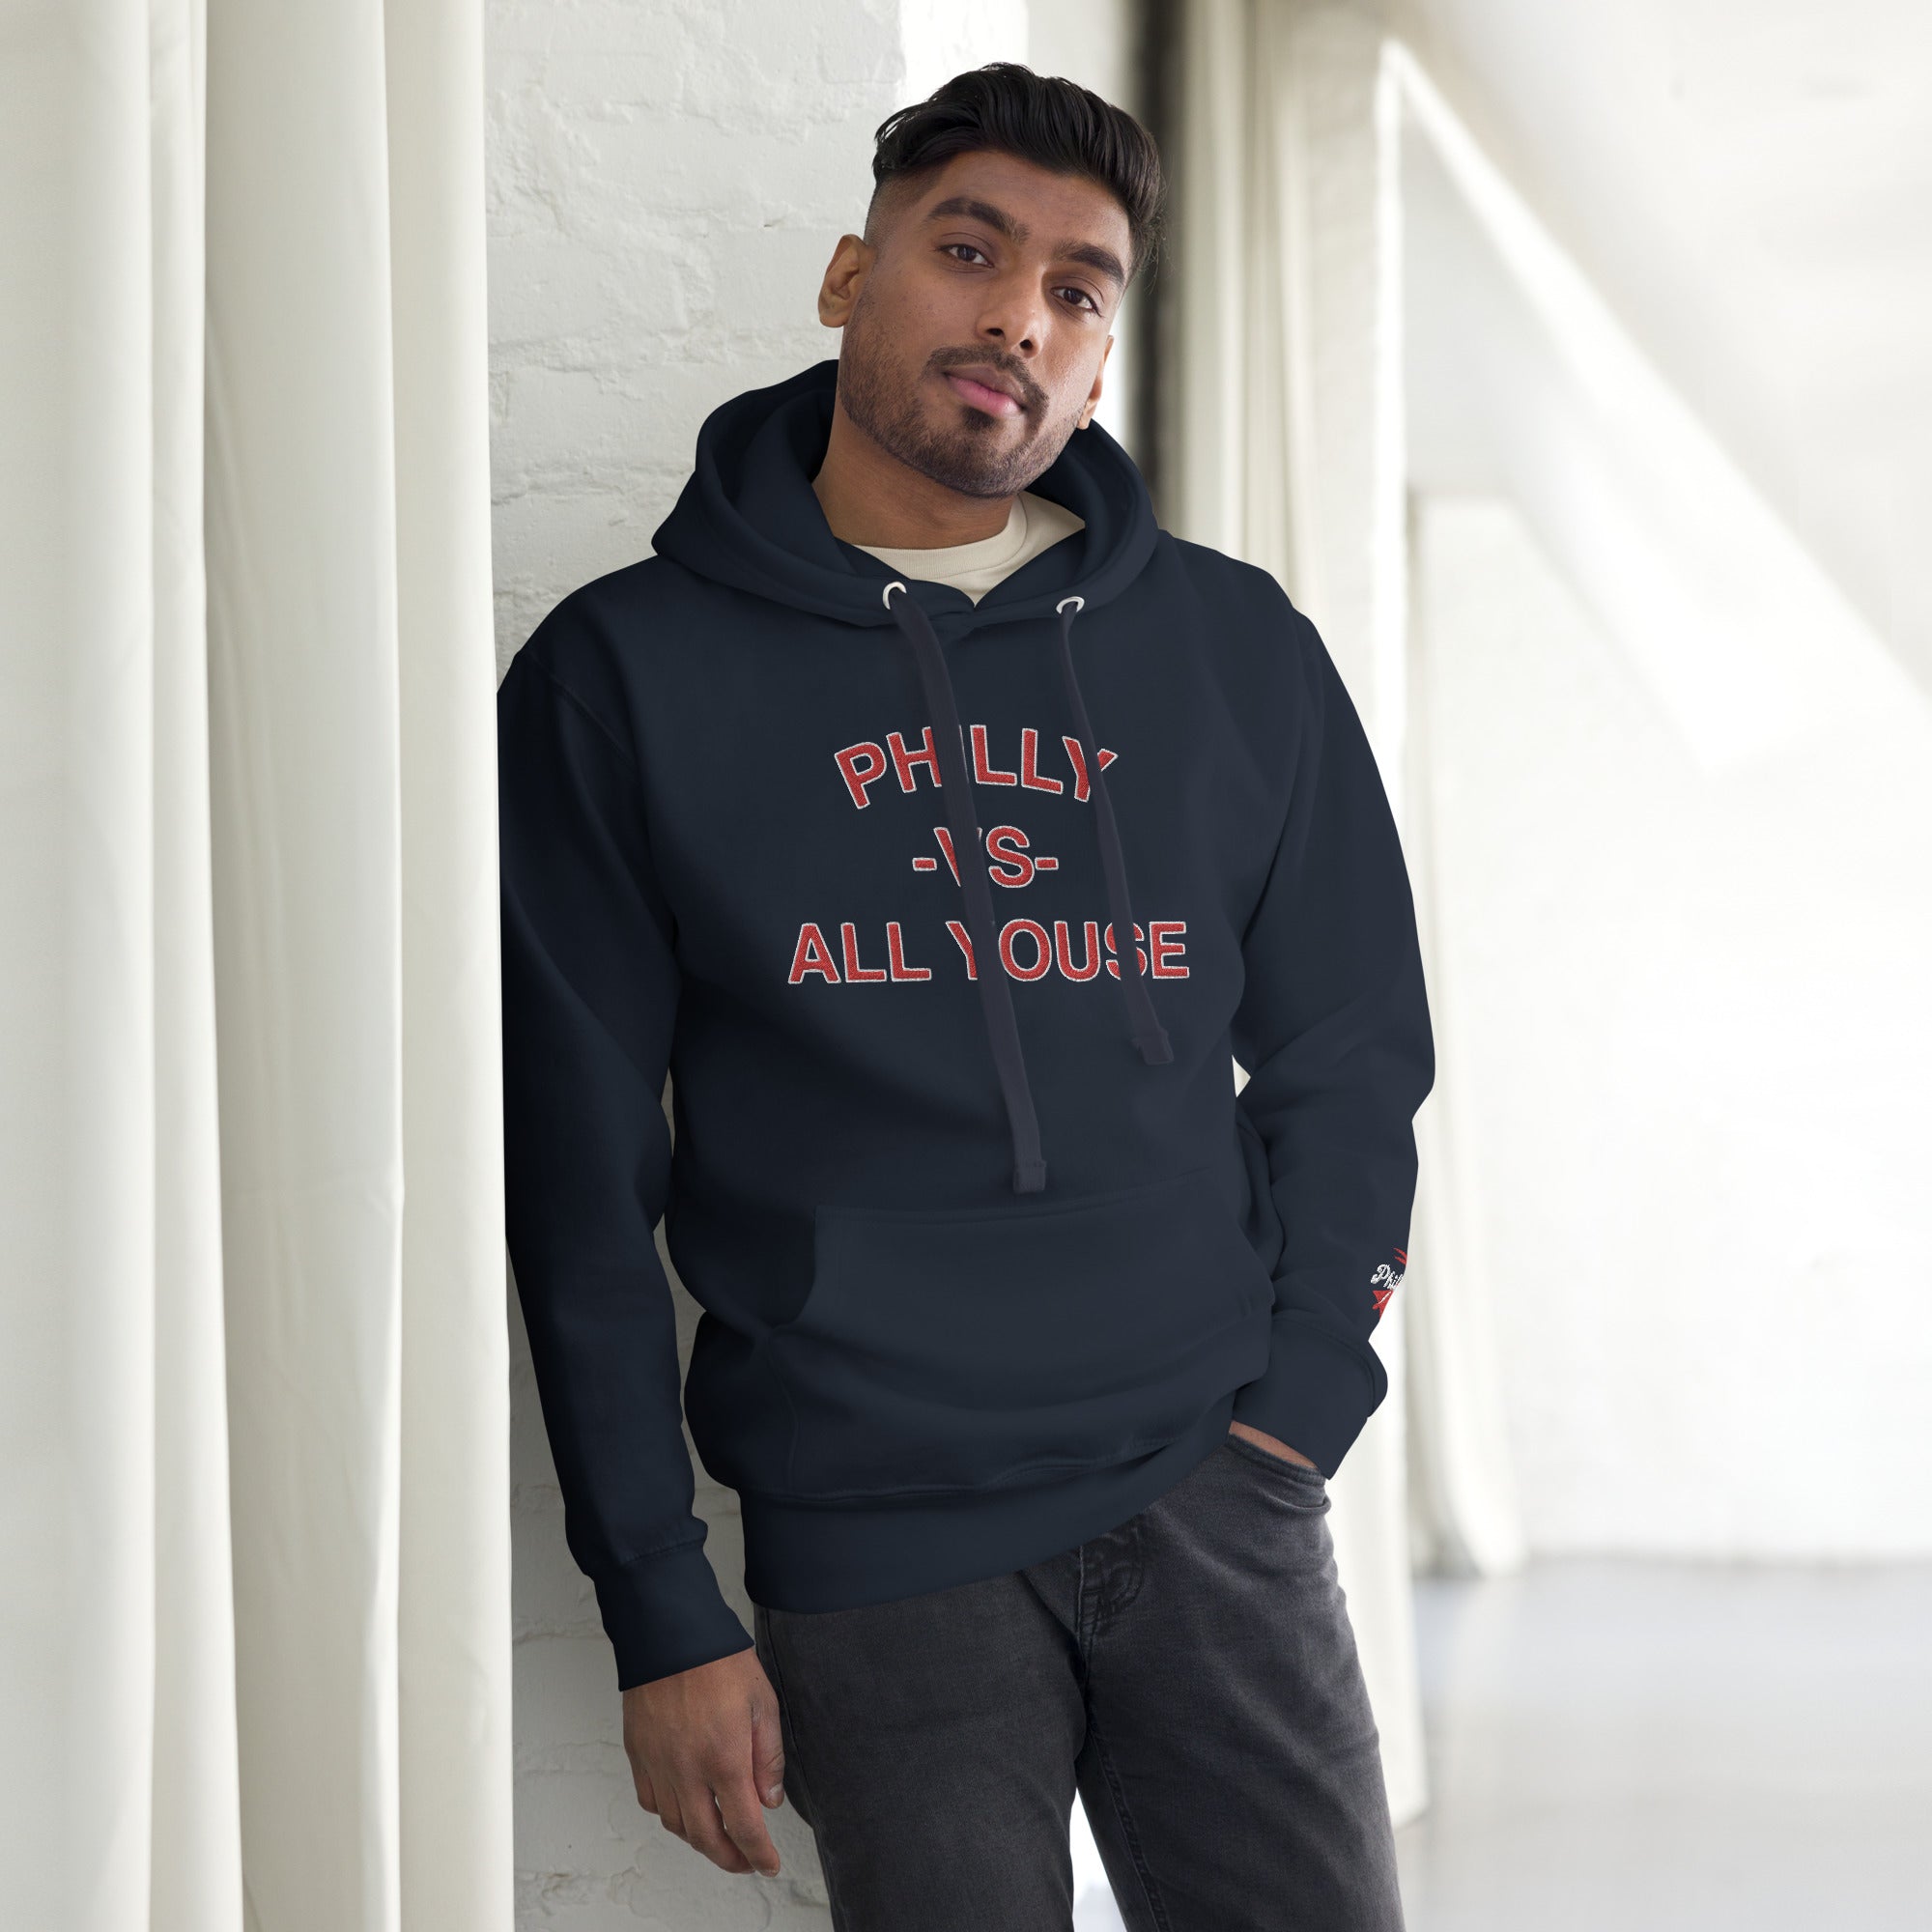 "Philly vs. All Youse" Embroidered Hoodie